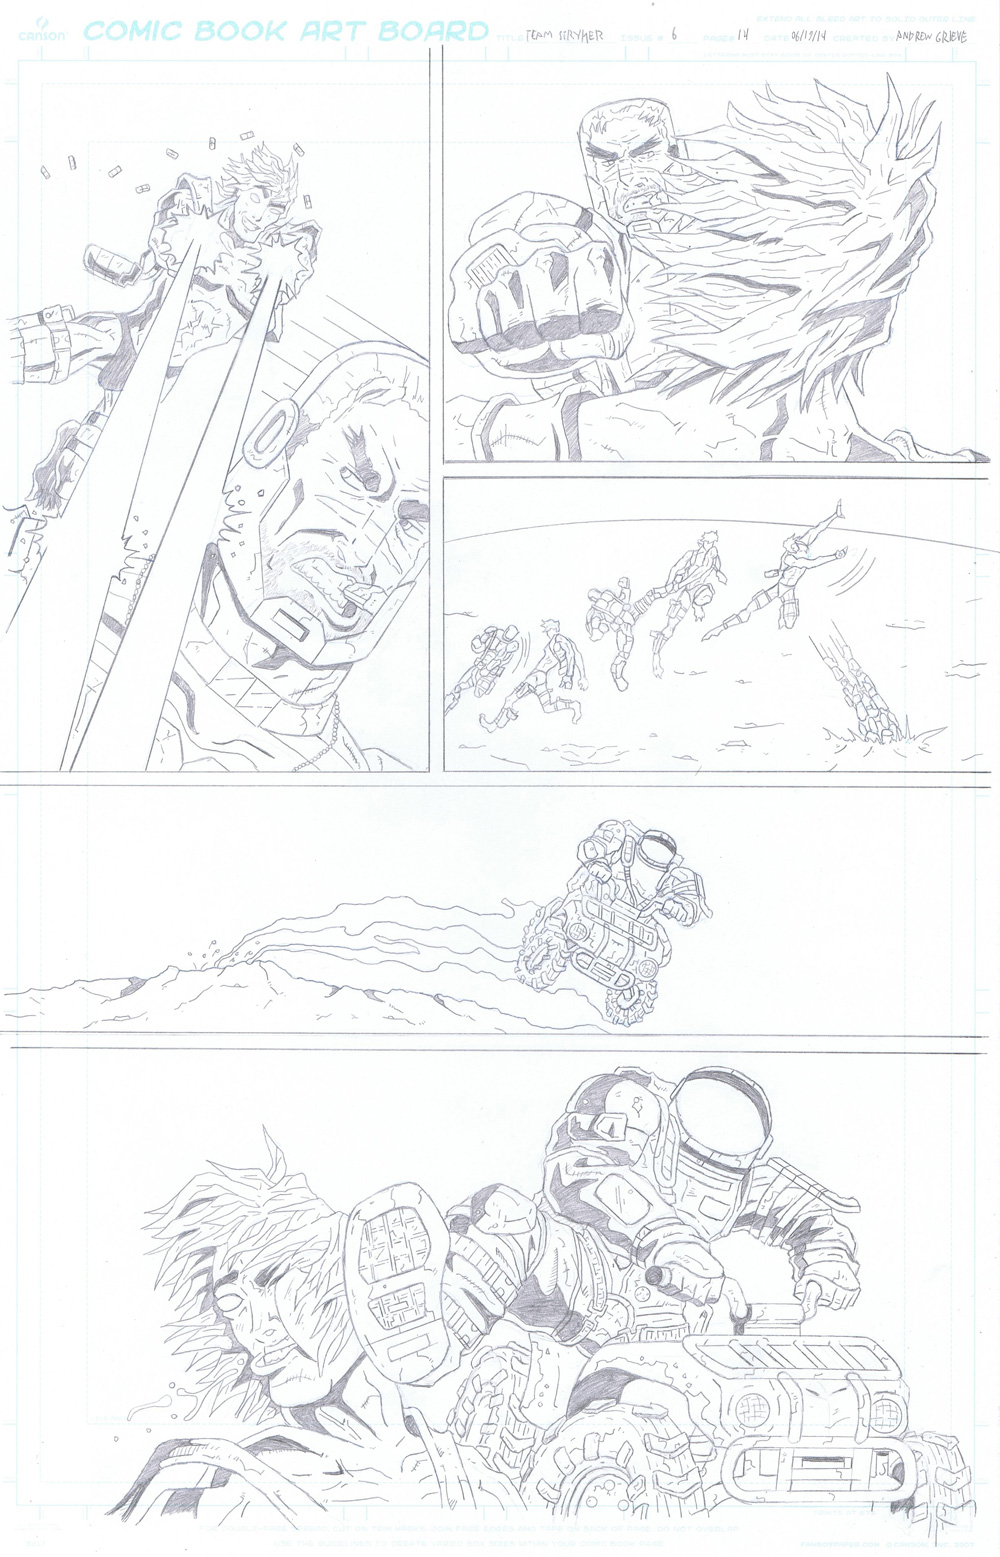 MISSION 006: PAGE 14 PENCIL